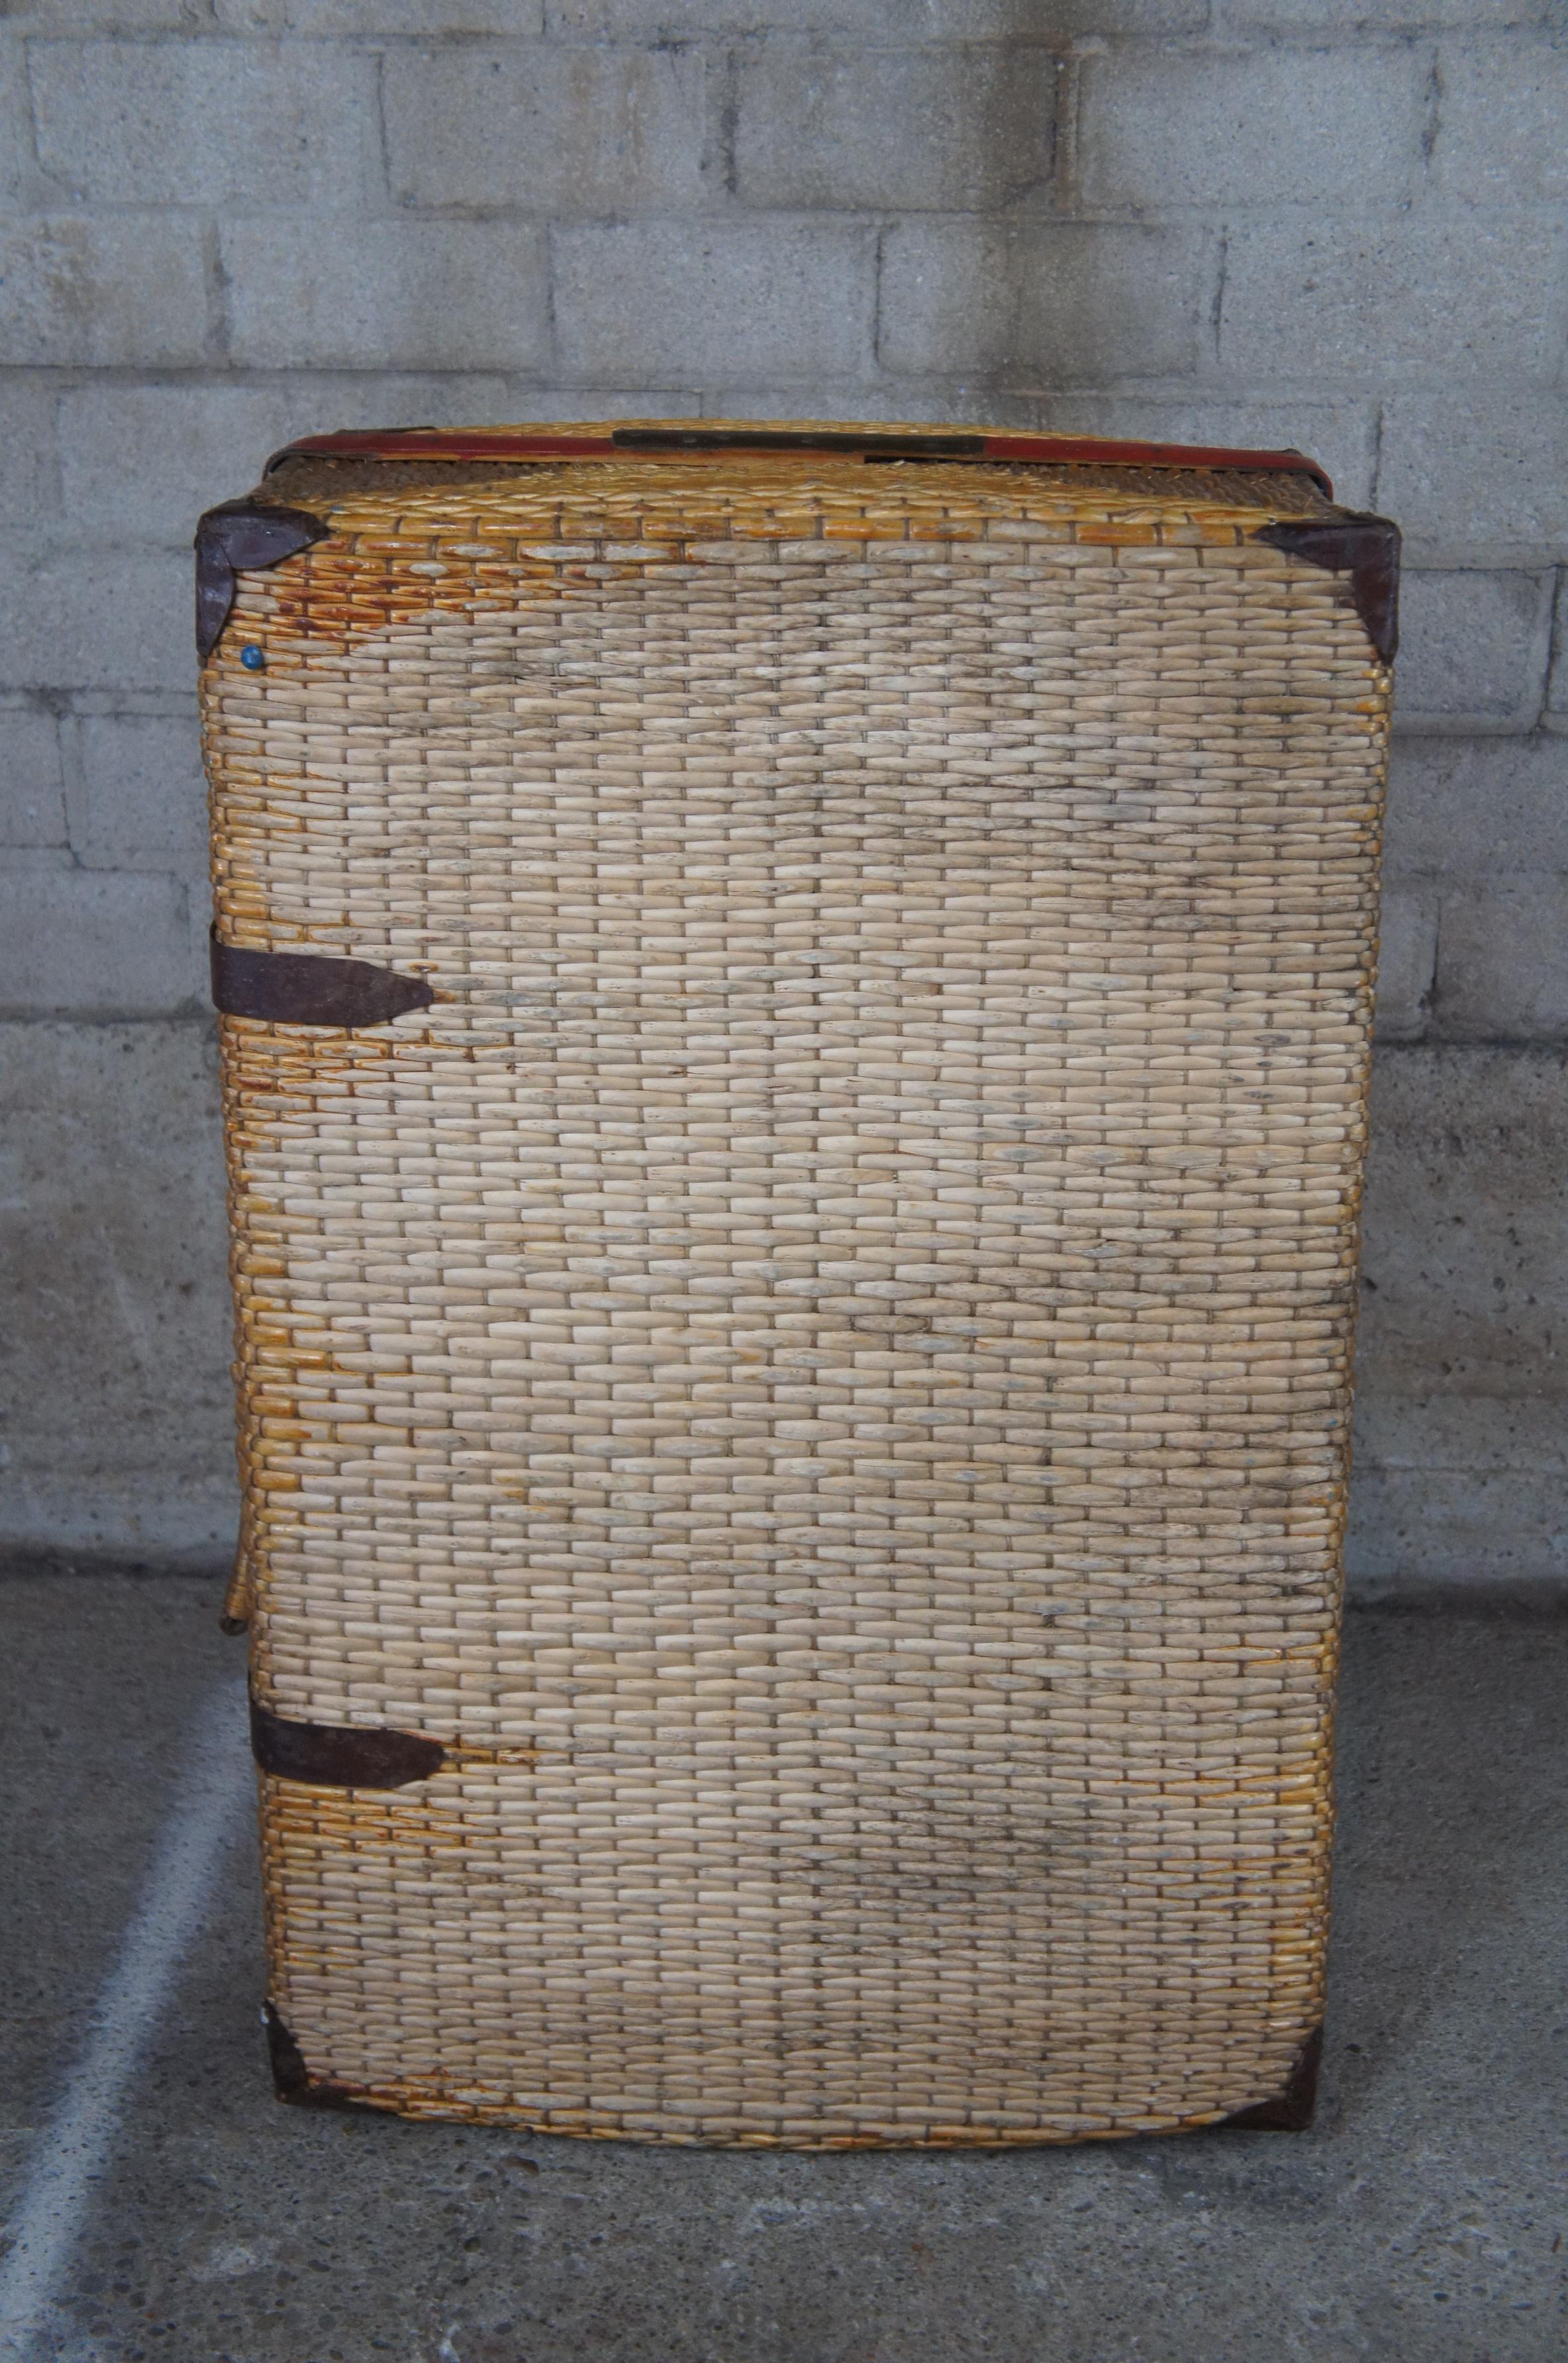 Antique Woven Rattan Bamboo Suitcase Luggage Trunk Coffee Table Boho Chic 1